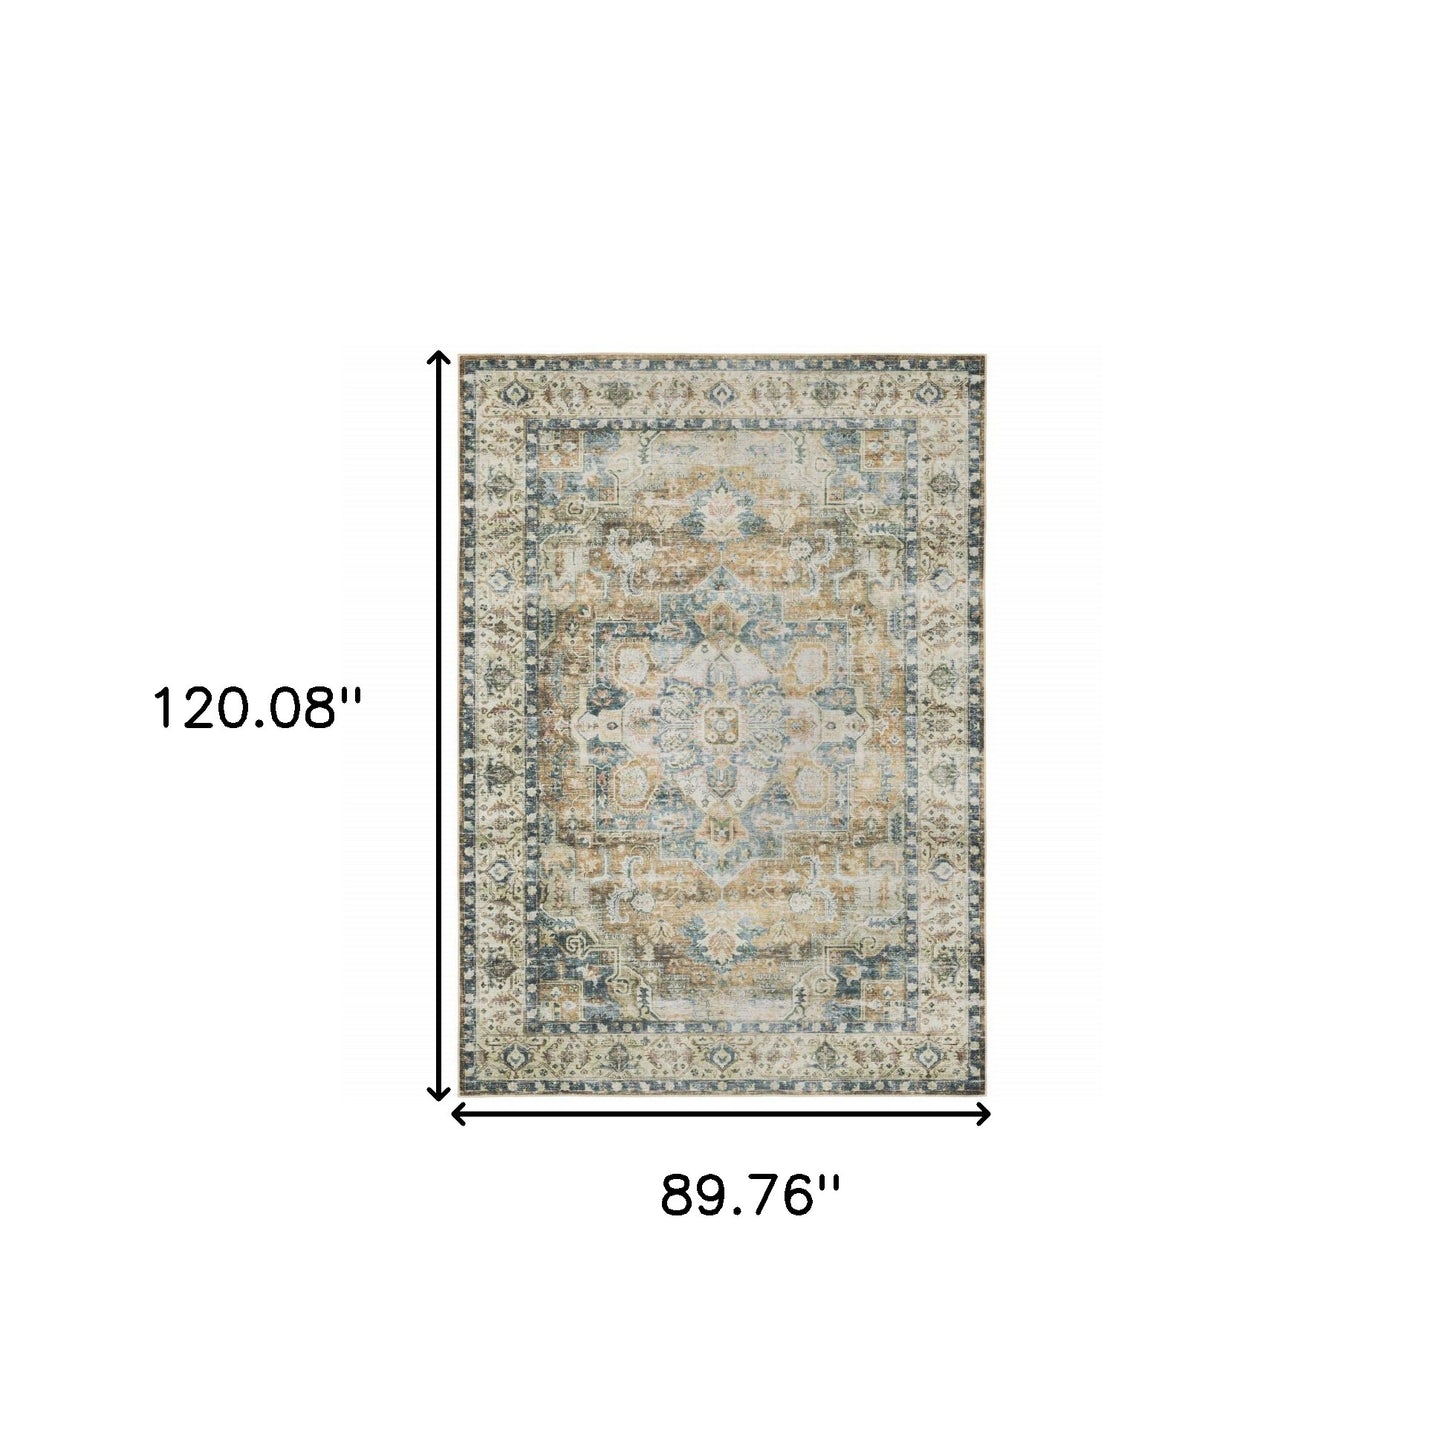 7' X 10' Blue Gold Brown Green And Salmon Oriental Printed Stain Resistant Non Skid Area Rug